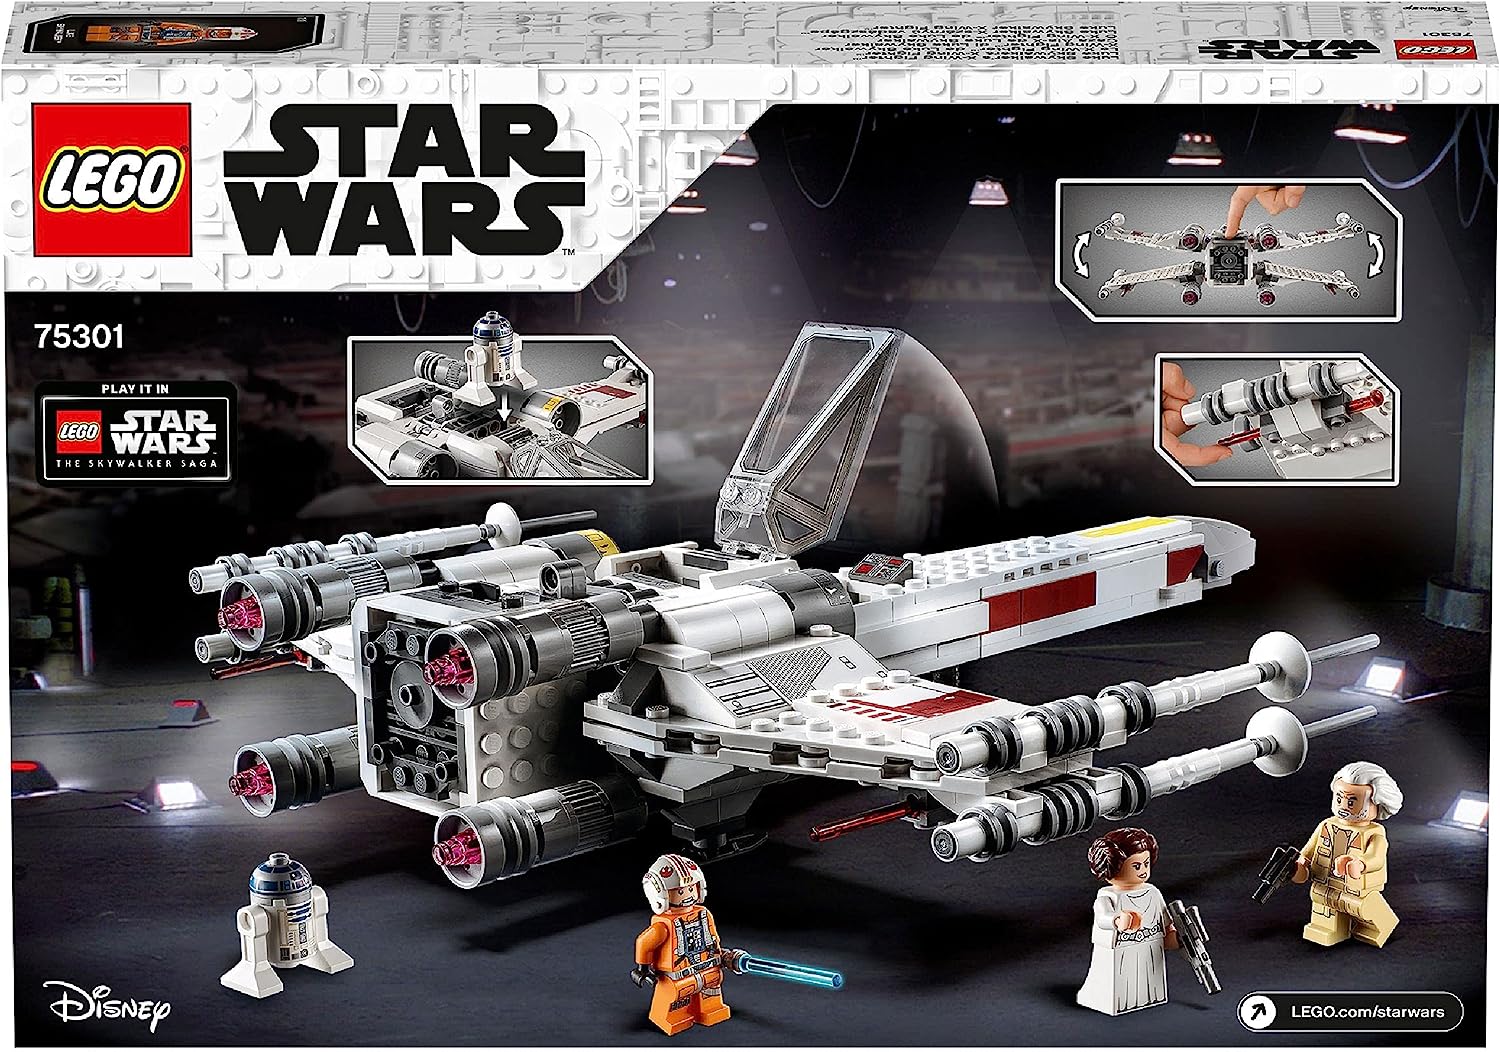 Lego 75301 Star Wars Luke Skywalker\'s X-Wing Fighter Toy with Princess Leia and Droid R2-D2 as Figure.